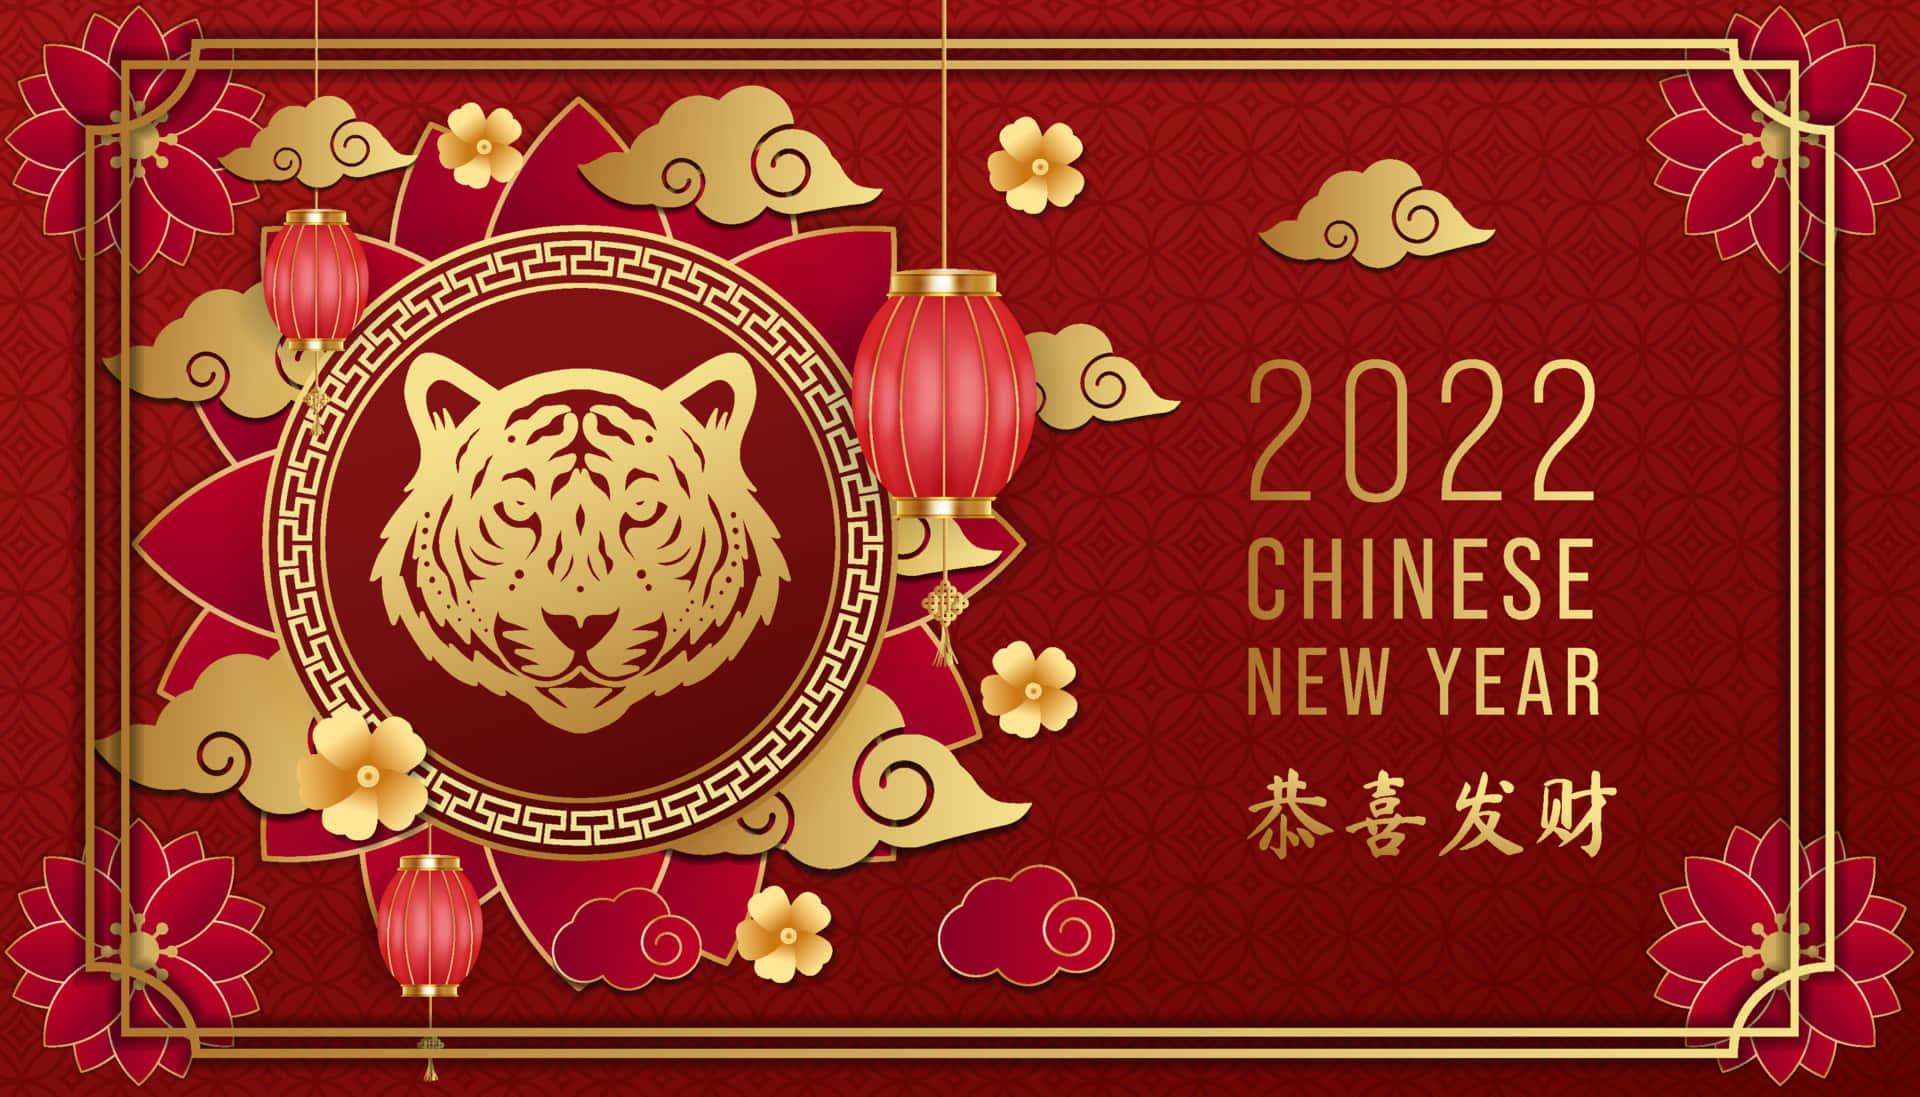 Welcome the Year of the Tiger with Chinese New Year 2022!